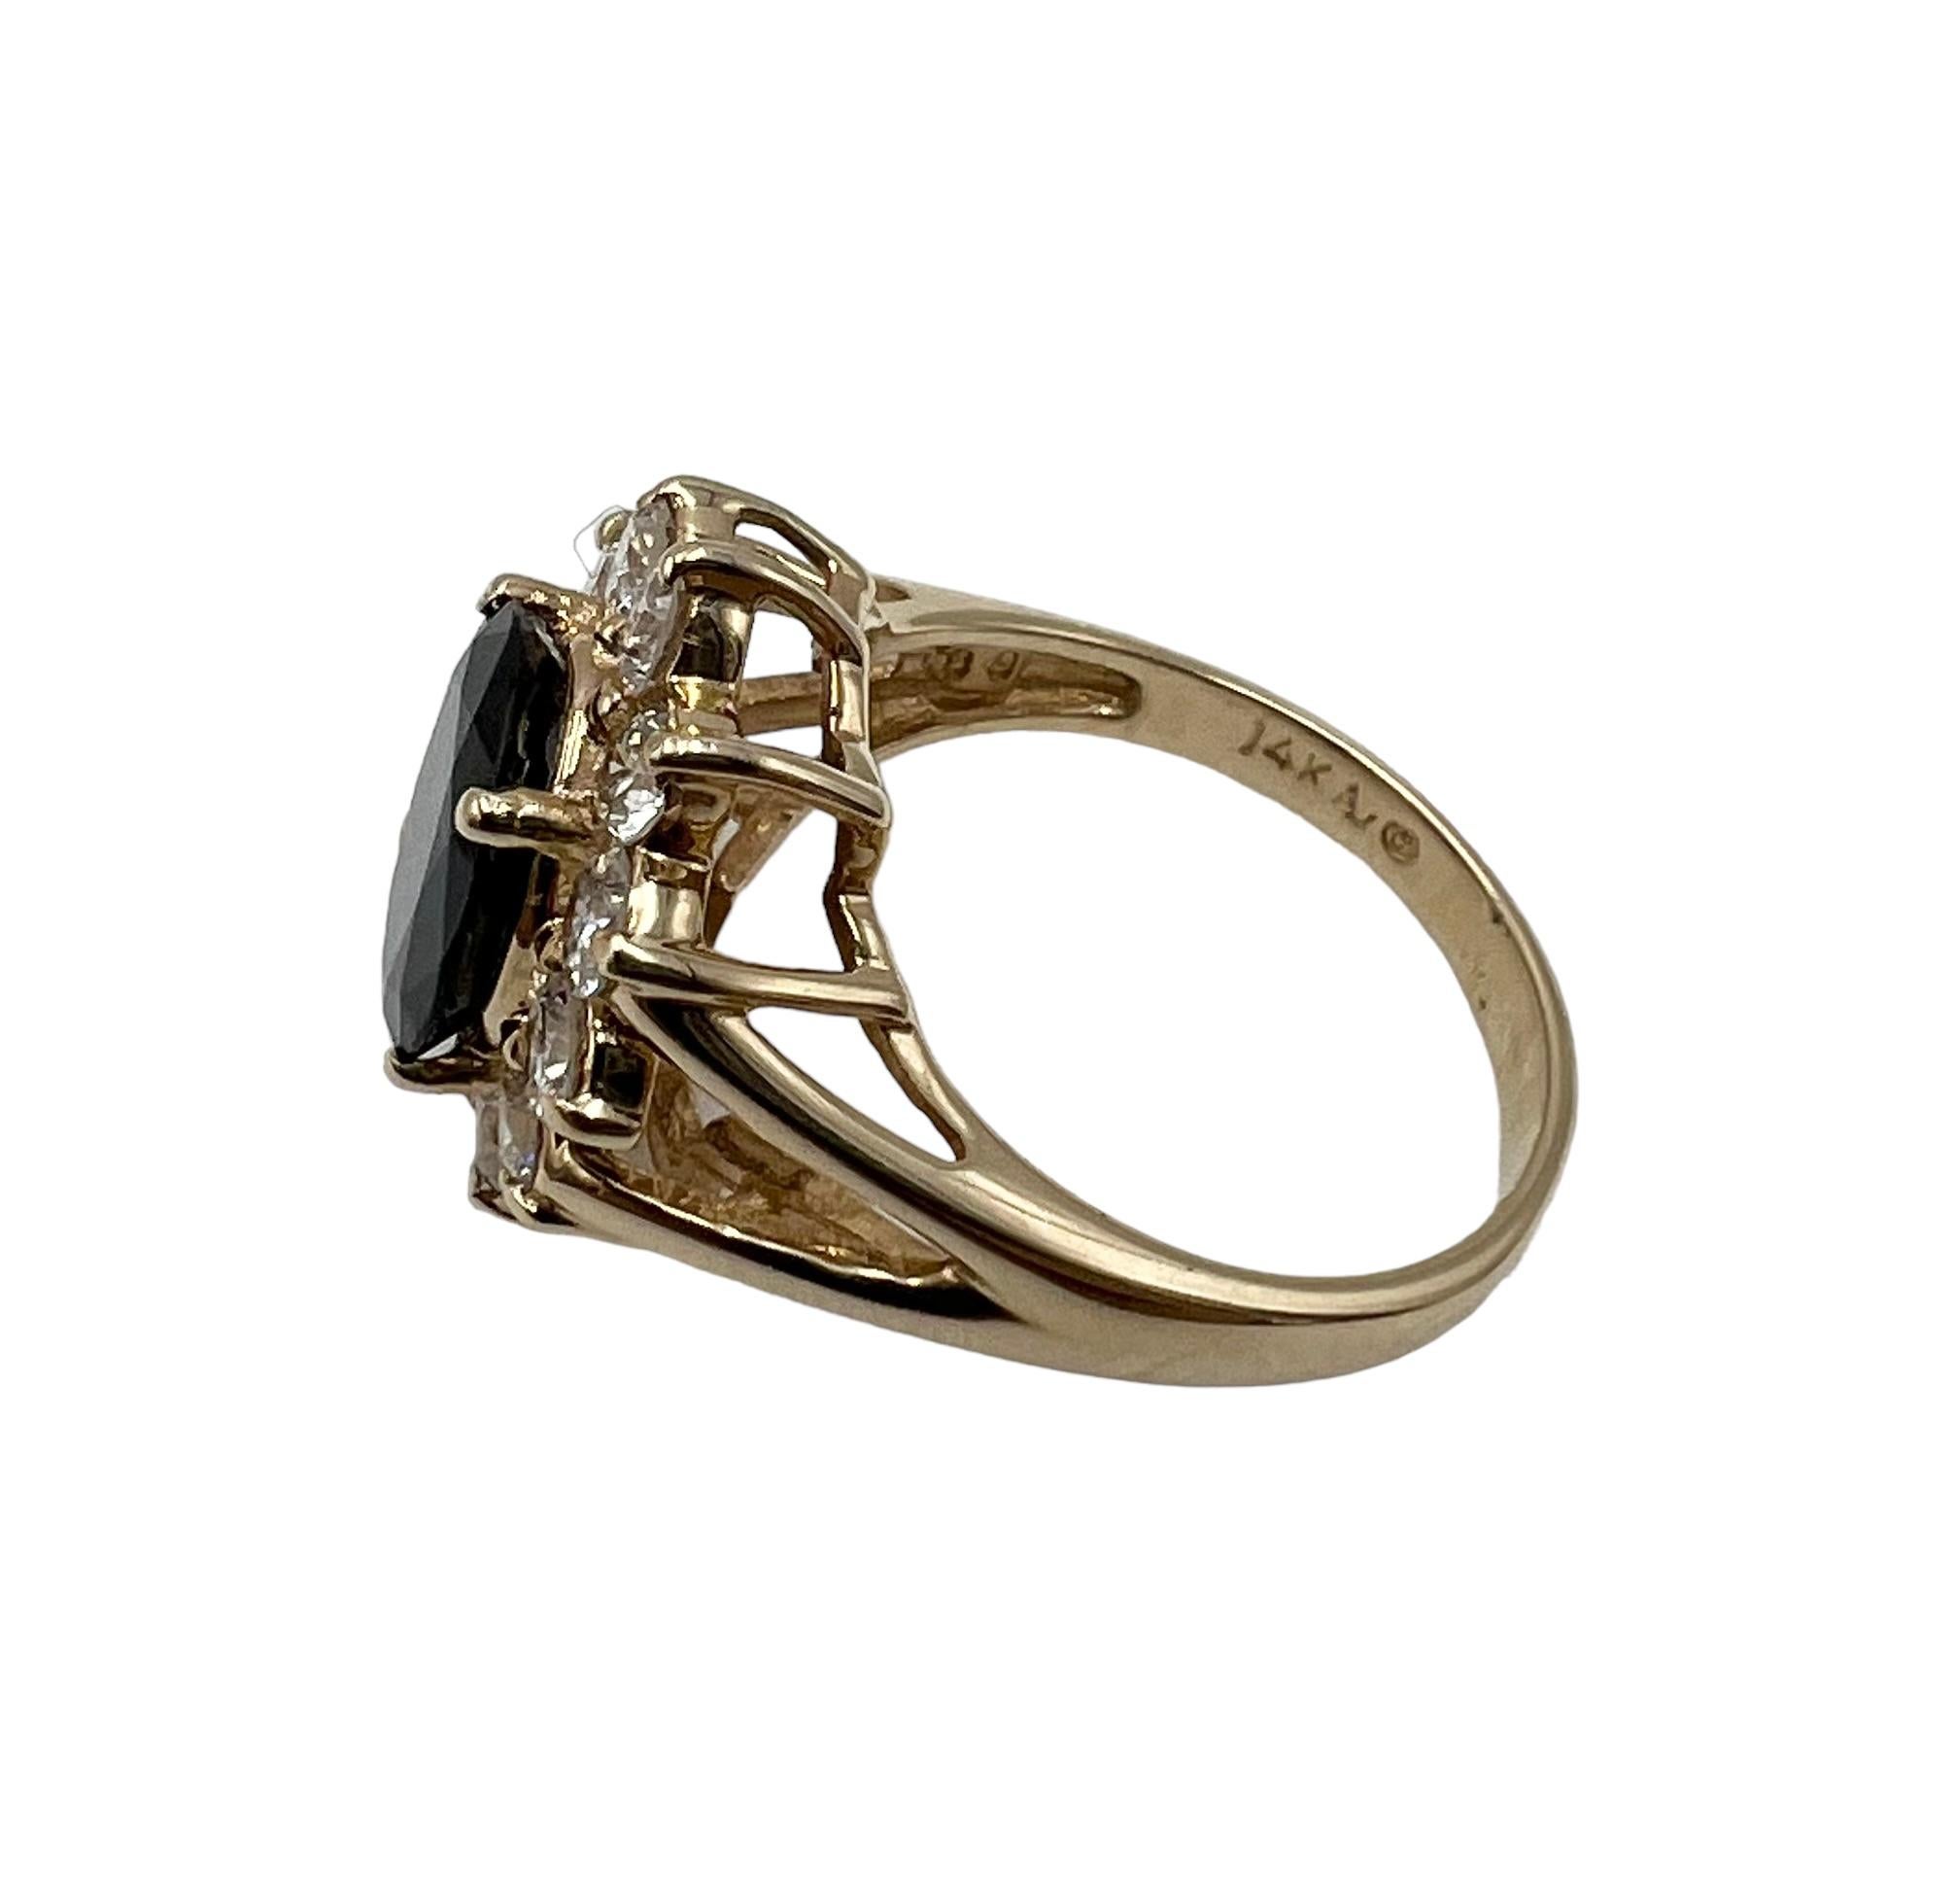 This 14k Yellow Gold Saphire Ring is a one of a kind that you just have to have. A ring this beautiful will leave any one in awe. With Diamonds of G-H color and SI1-SI2 clarity, and a magnificent 2.50ct oval faceted deep dark blue natural sapphire